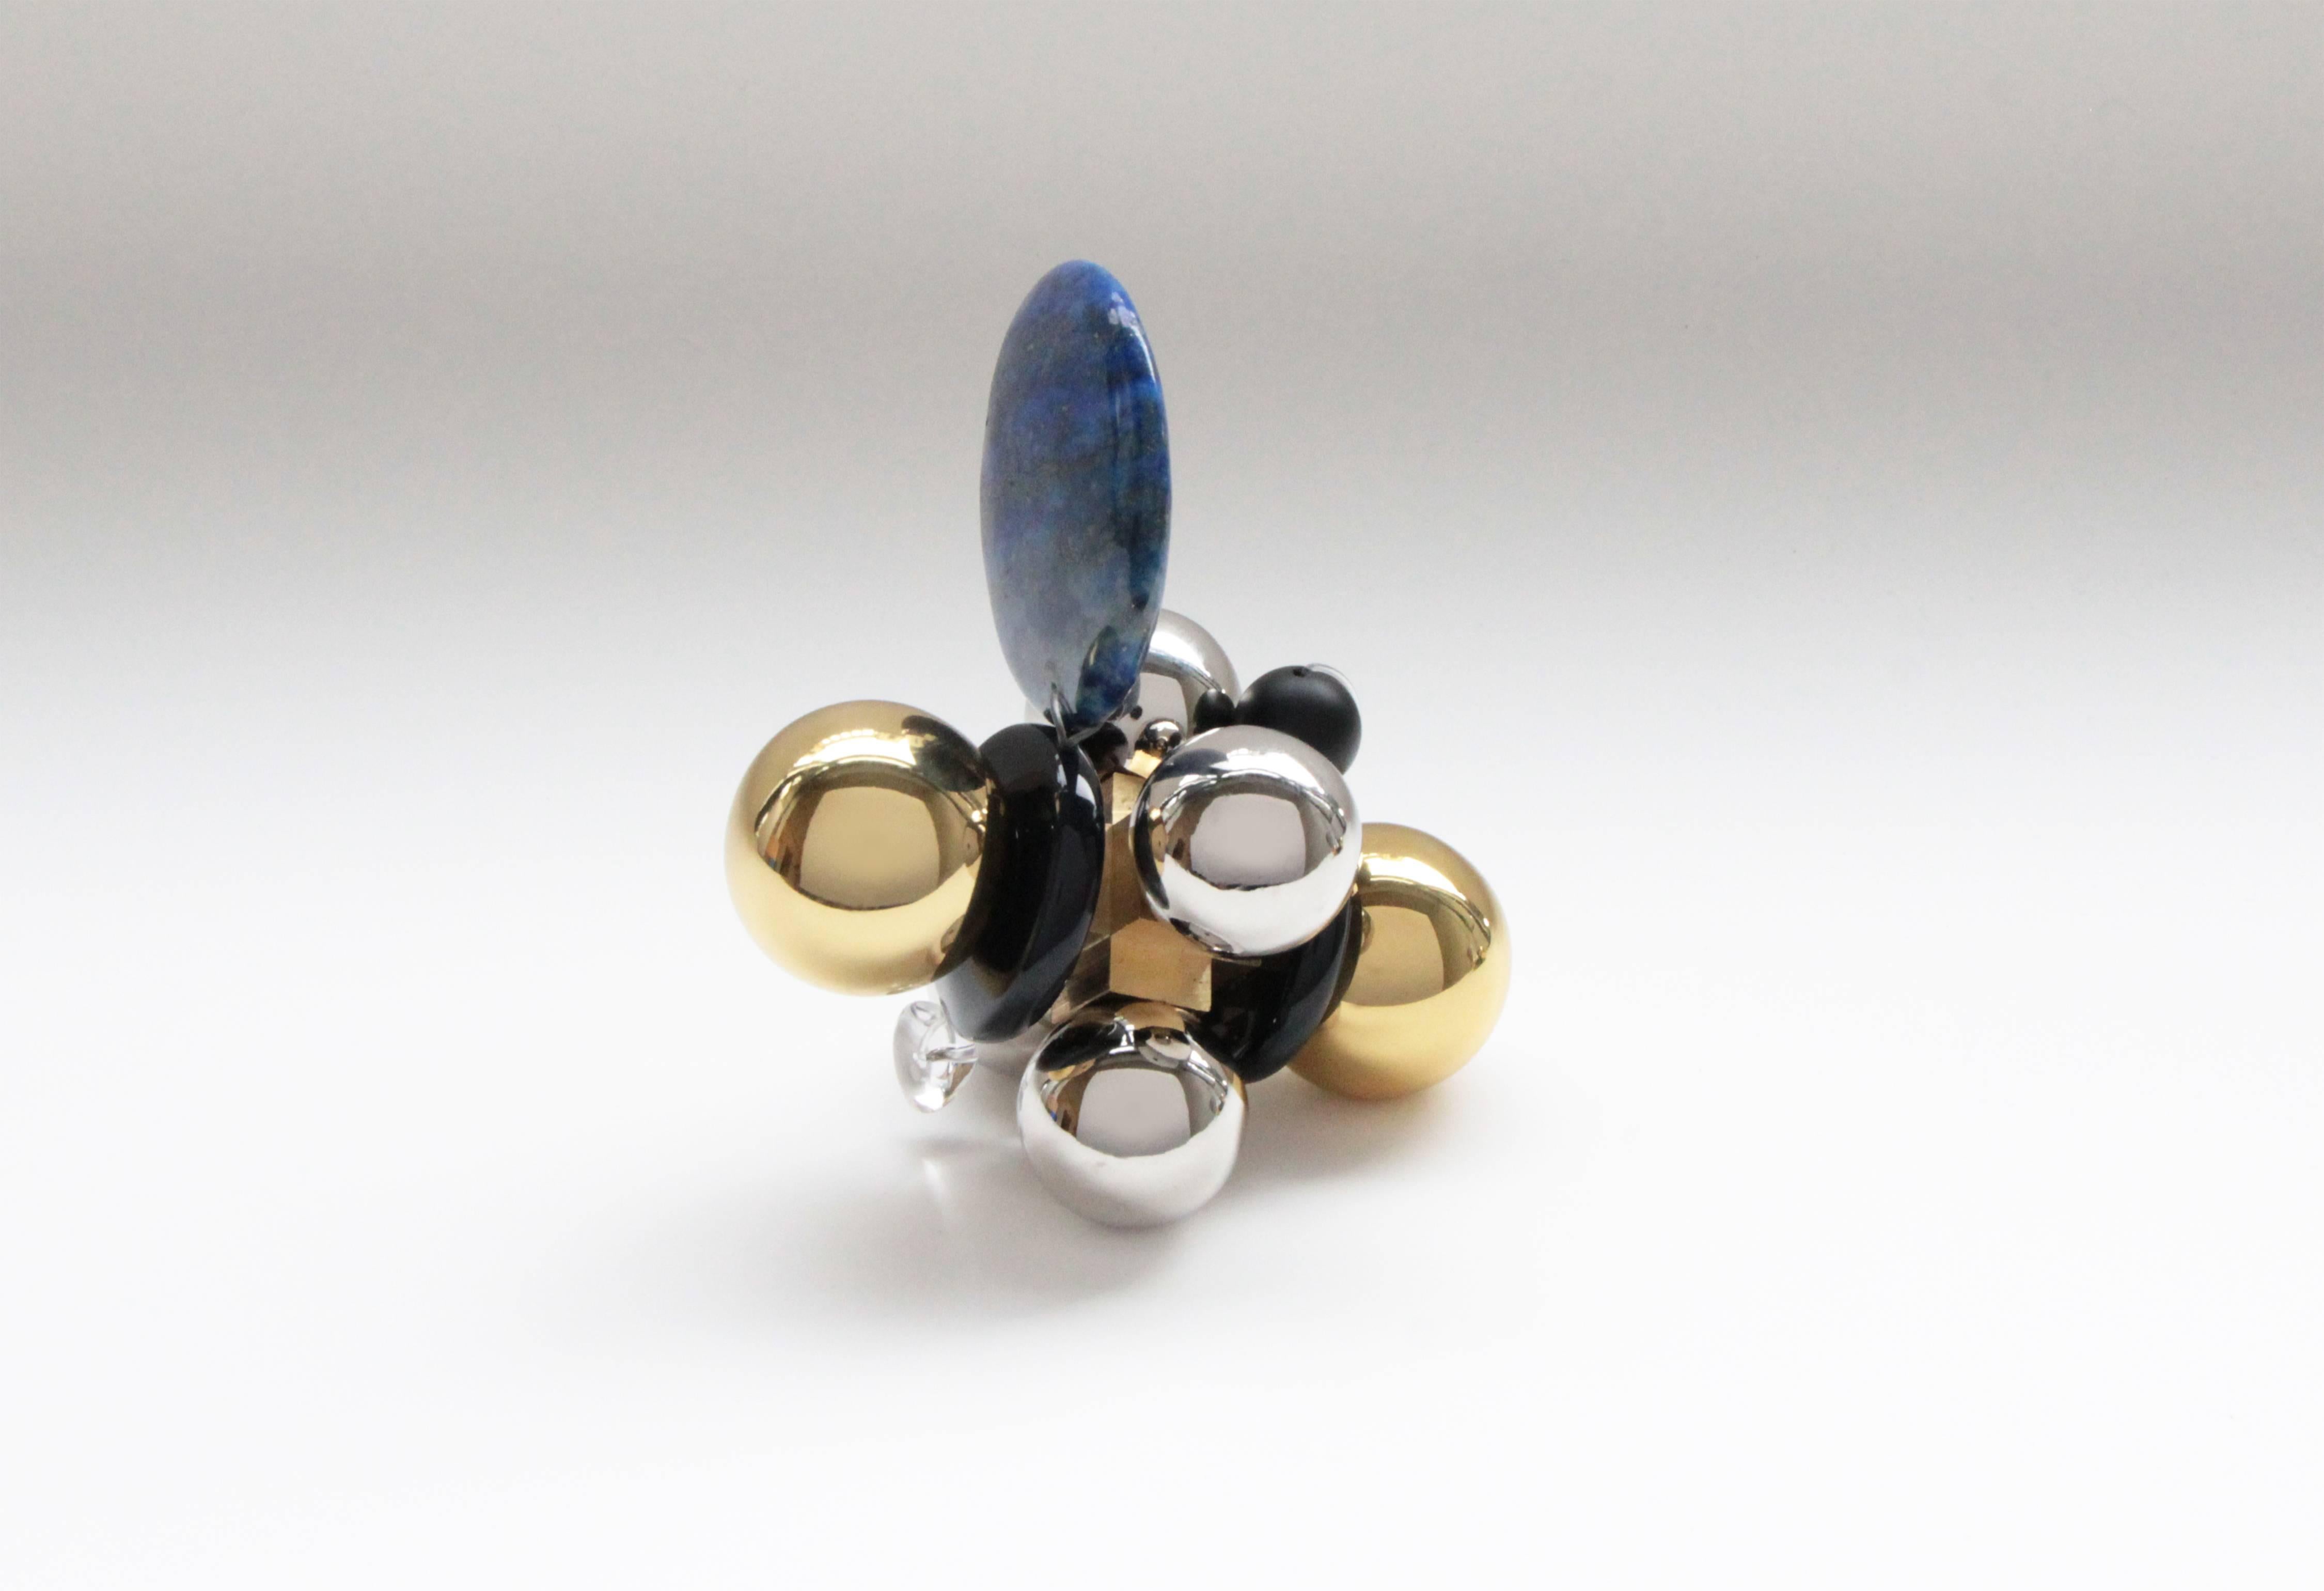 'Belu' is handcrafted from polished and sealed cast brass, nickel-plated spheres, blue lapis lazuli stone, glass beads, and clear quartz with black stone. This contemporary object makes for an ideal paperweight or small sculpture curiosity. Each one